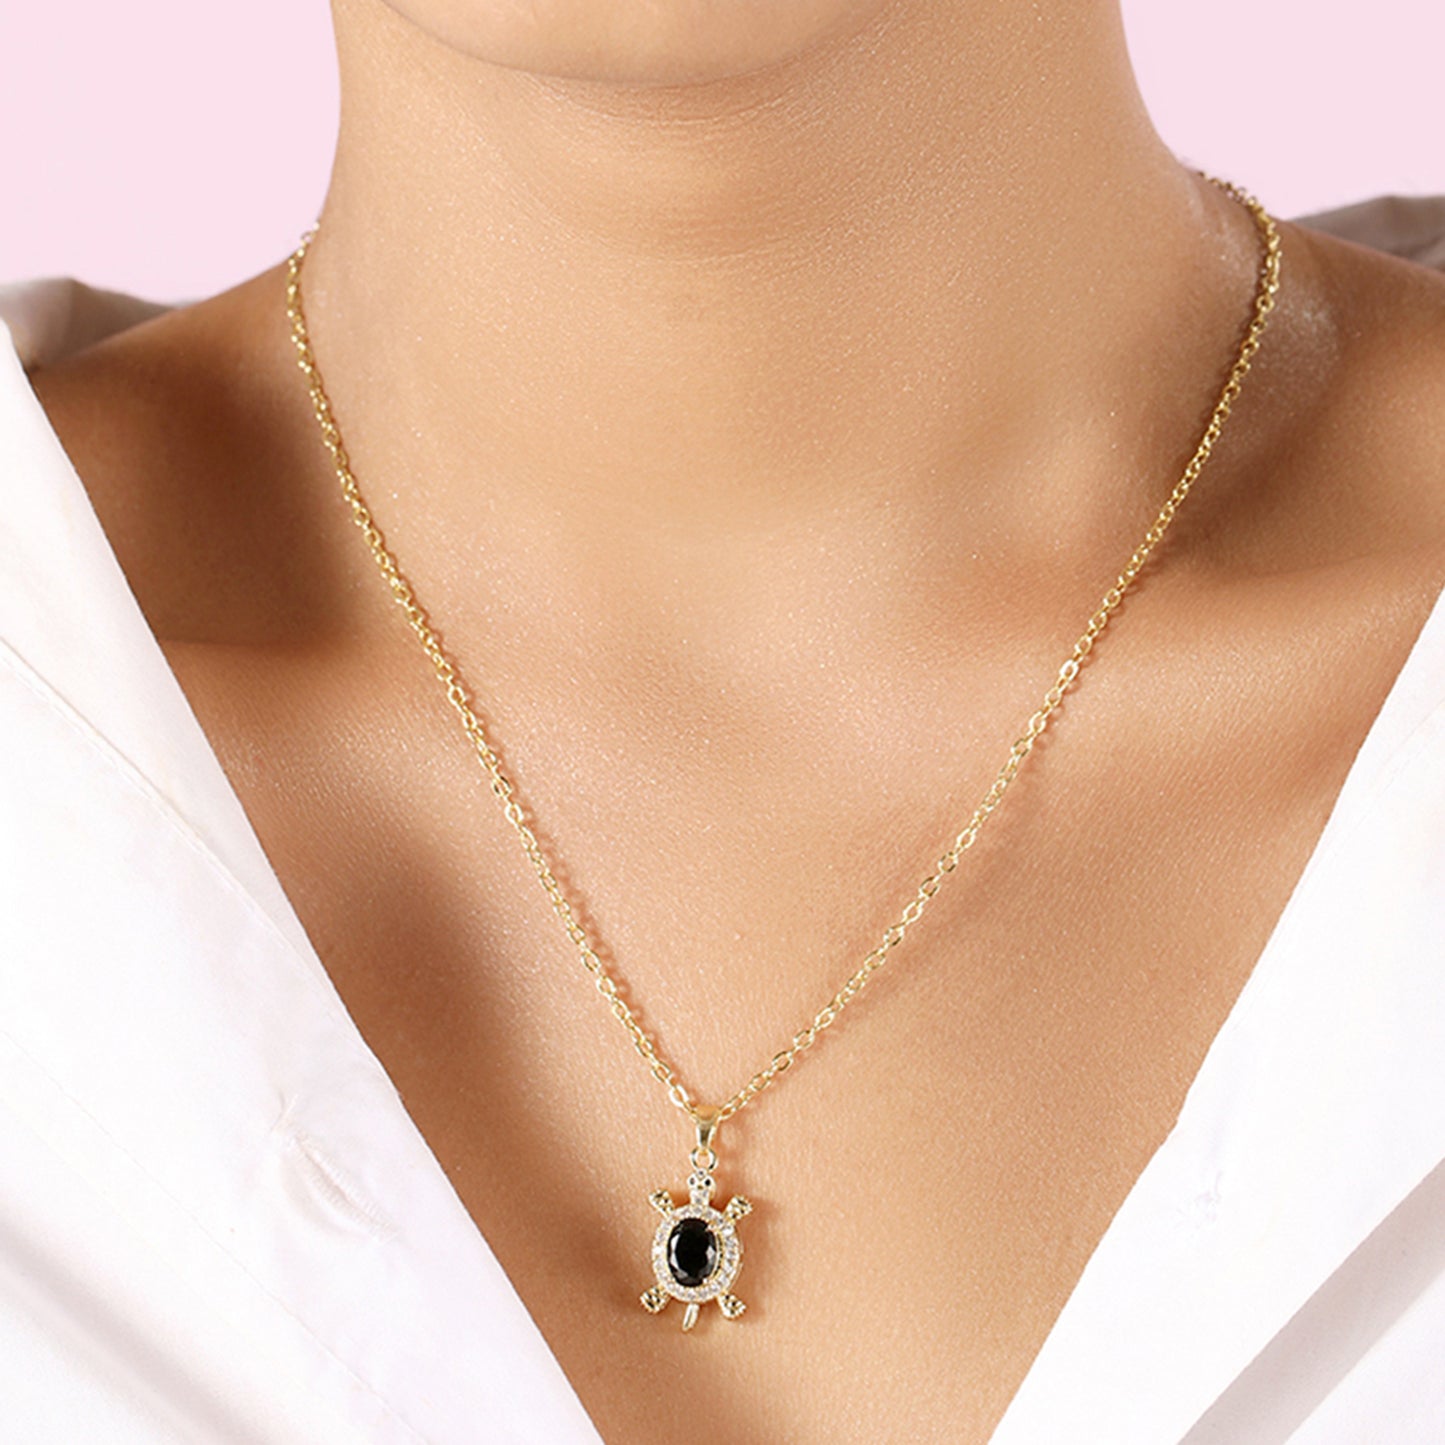 Gemstone Turtle Pendant with Gold Chain